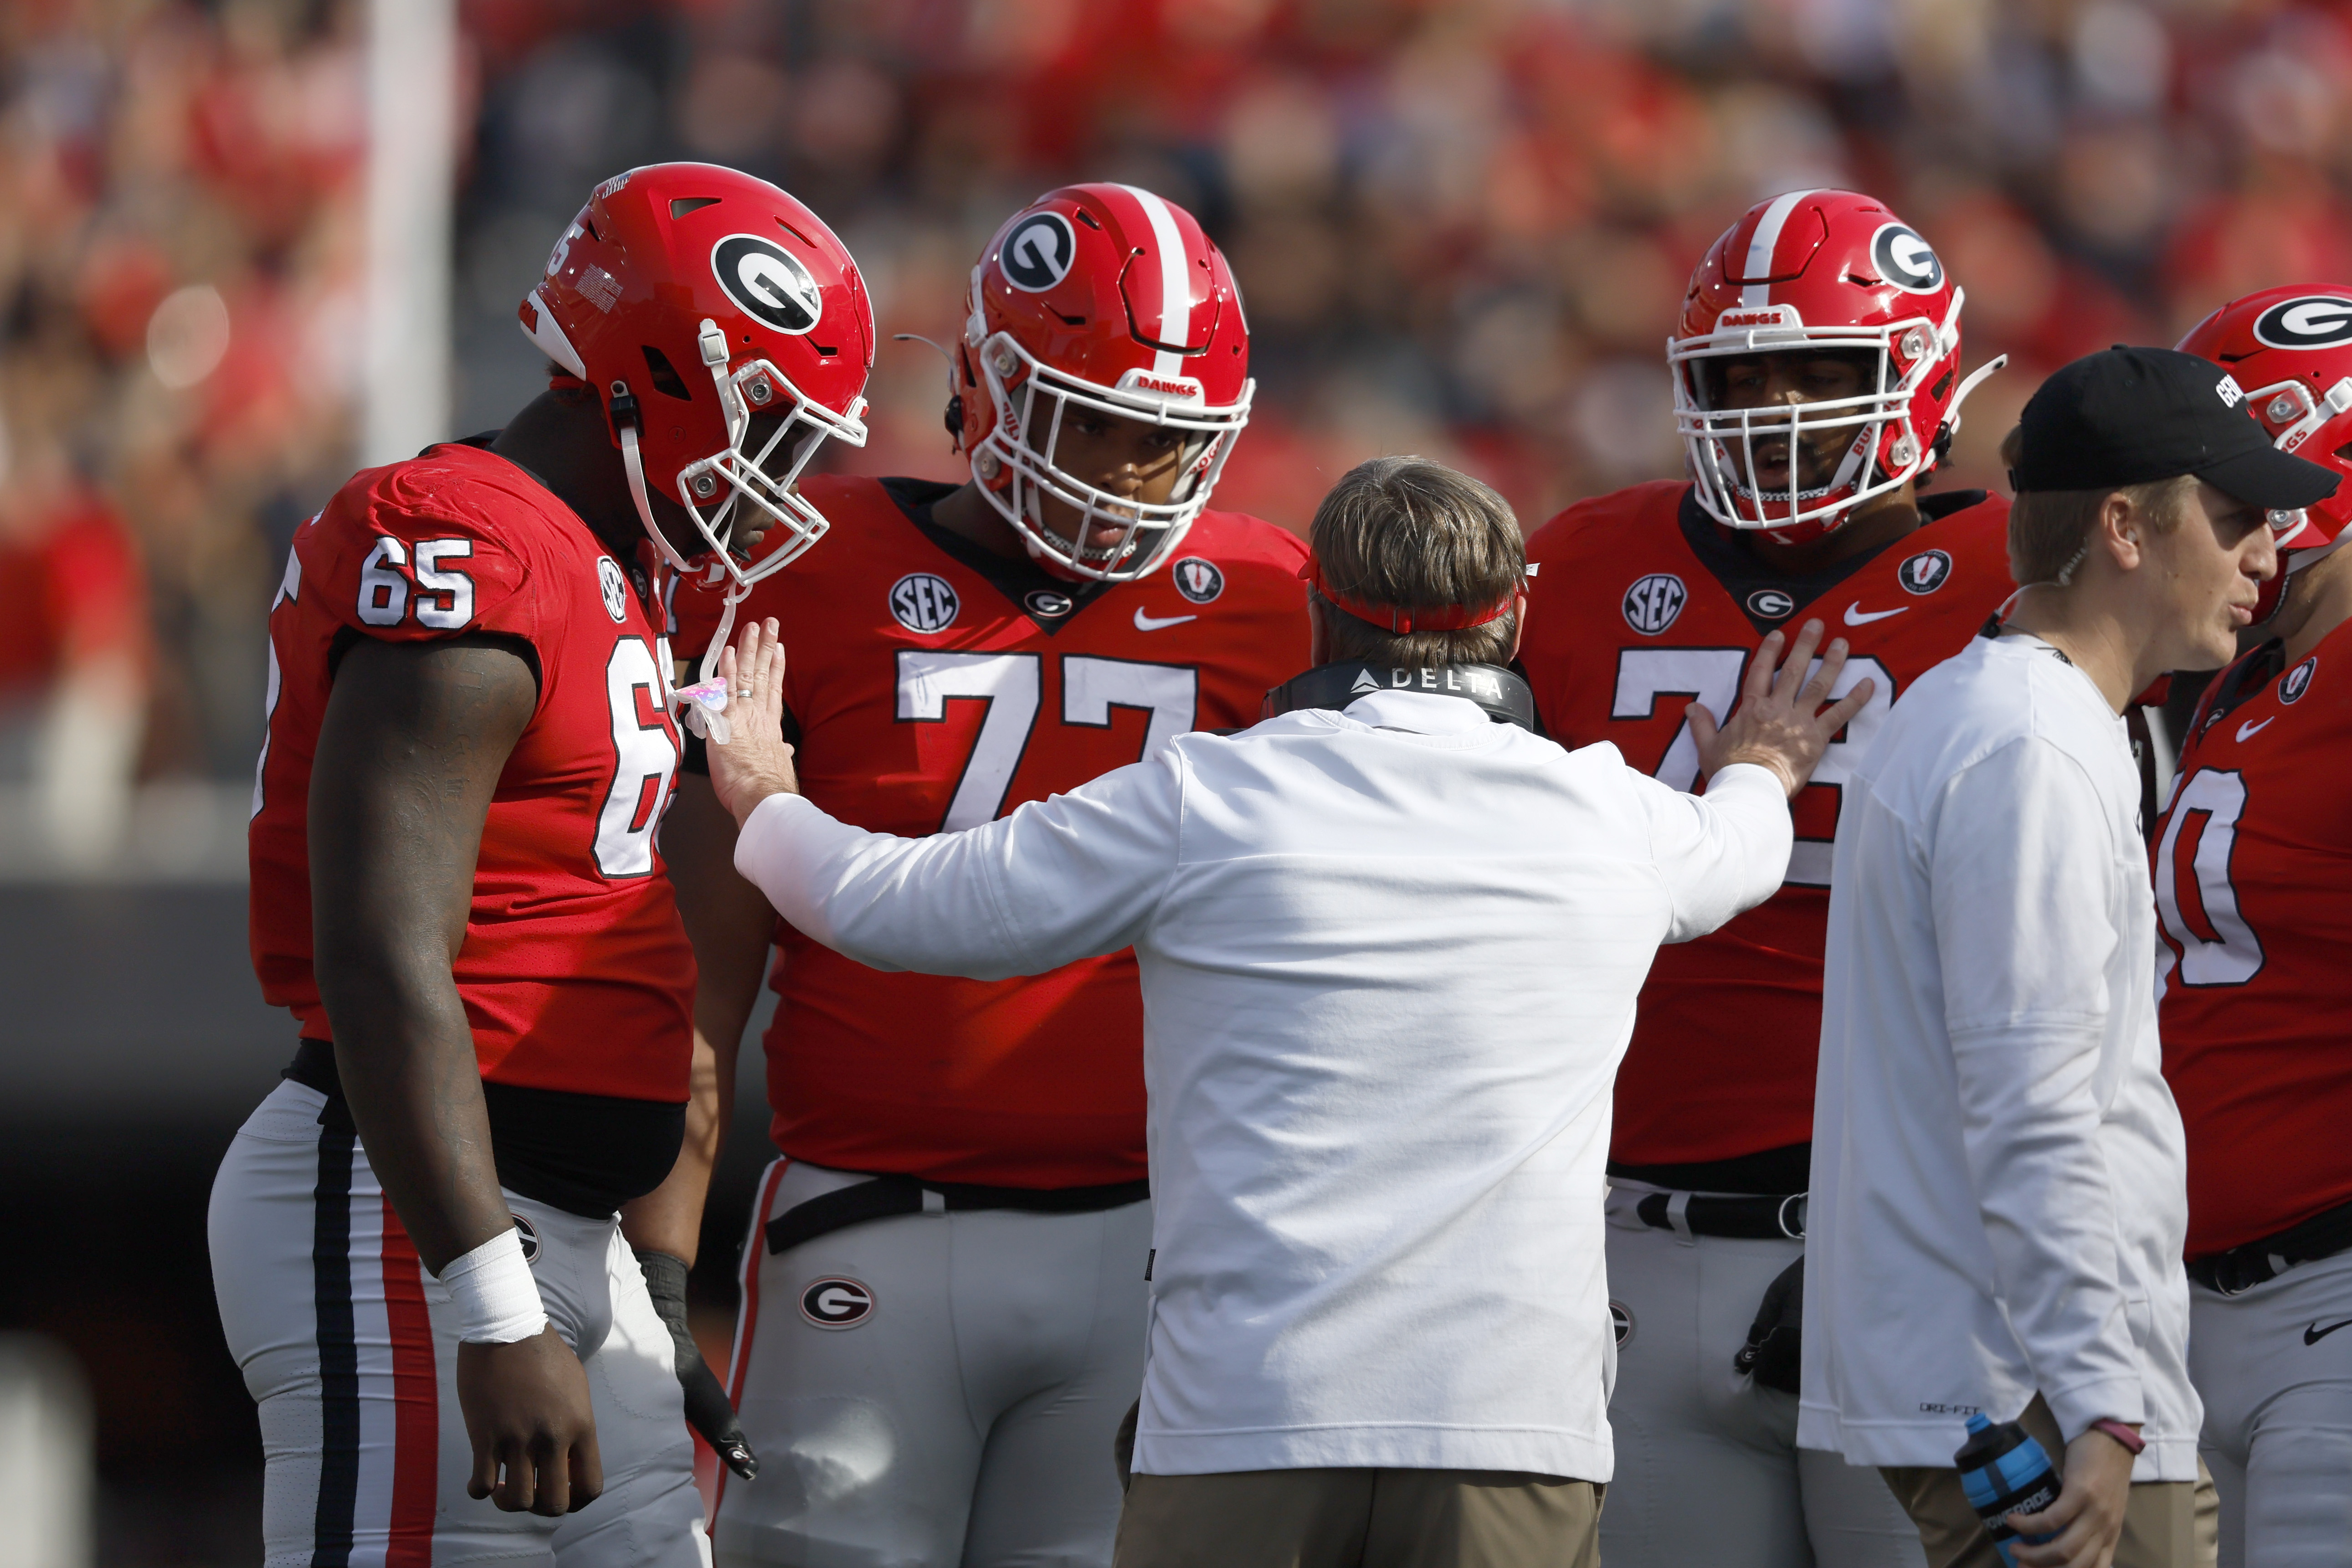 Georgia football's Kirby Smart on spring practice, national title